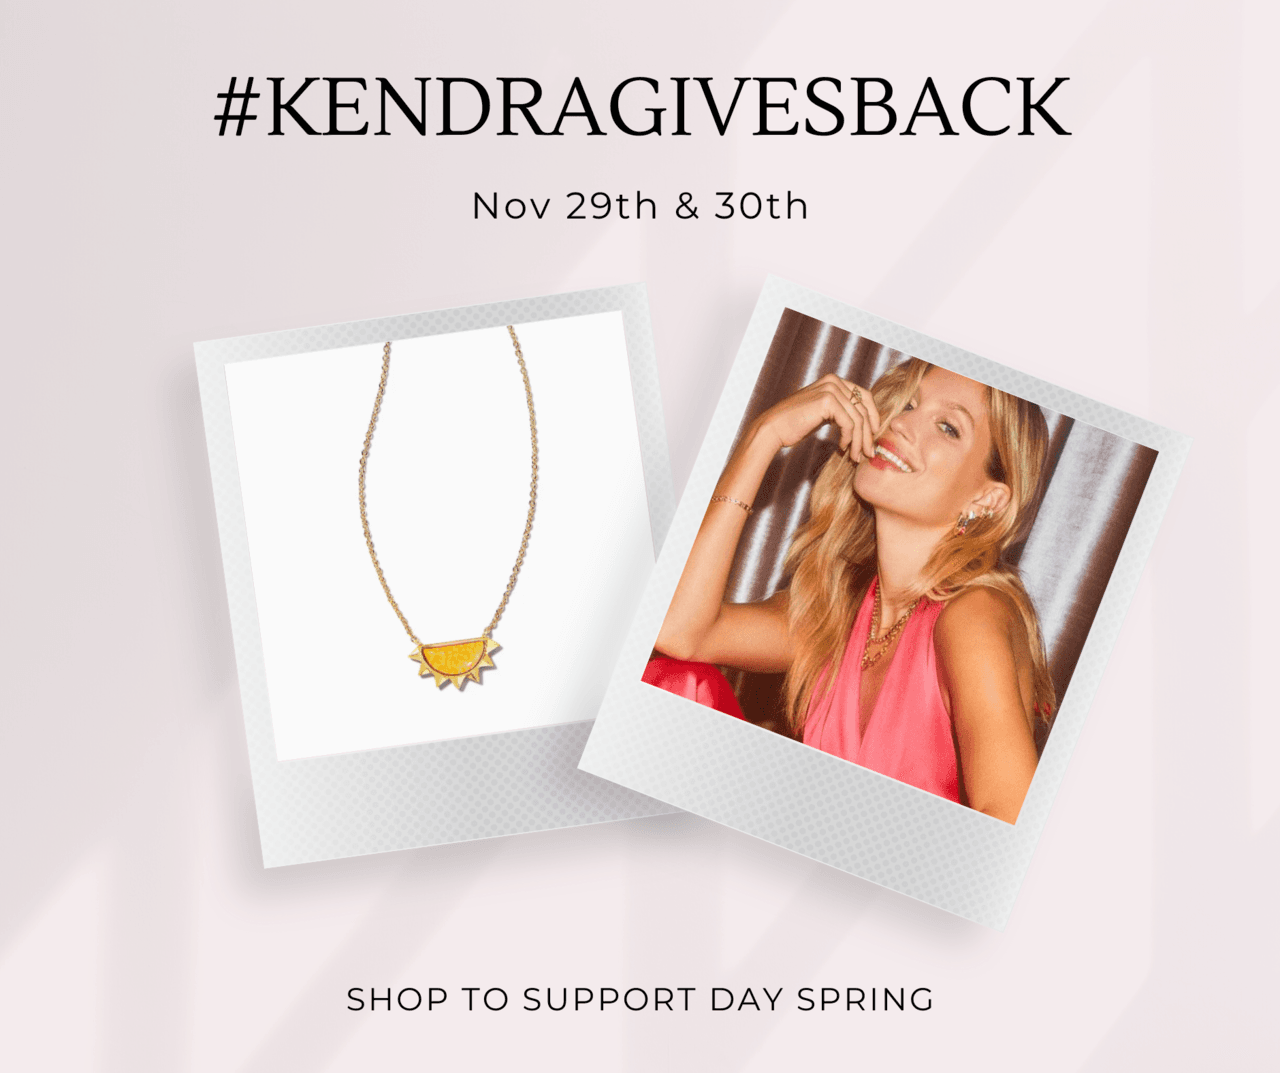 Day Spring Partners with Kendra Scott